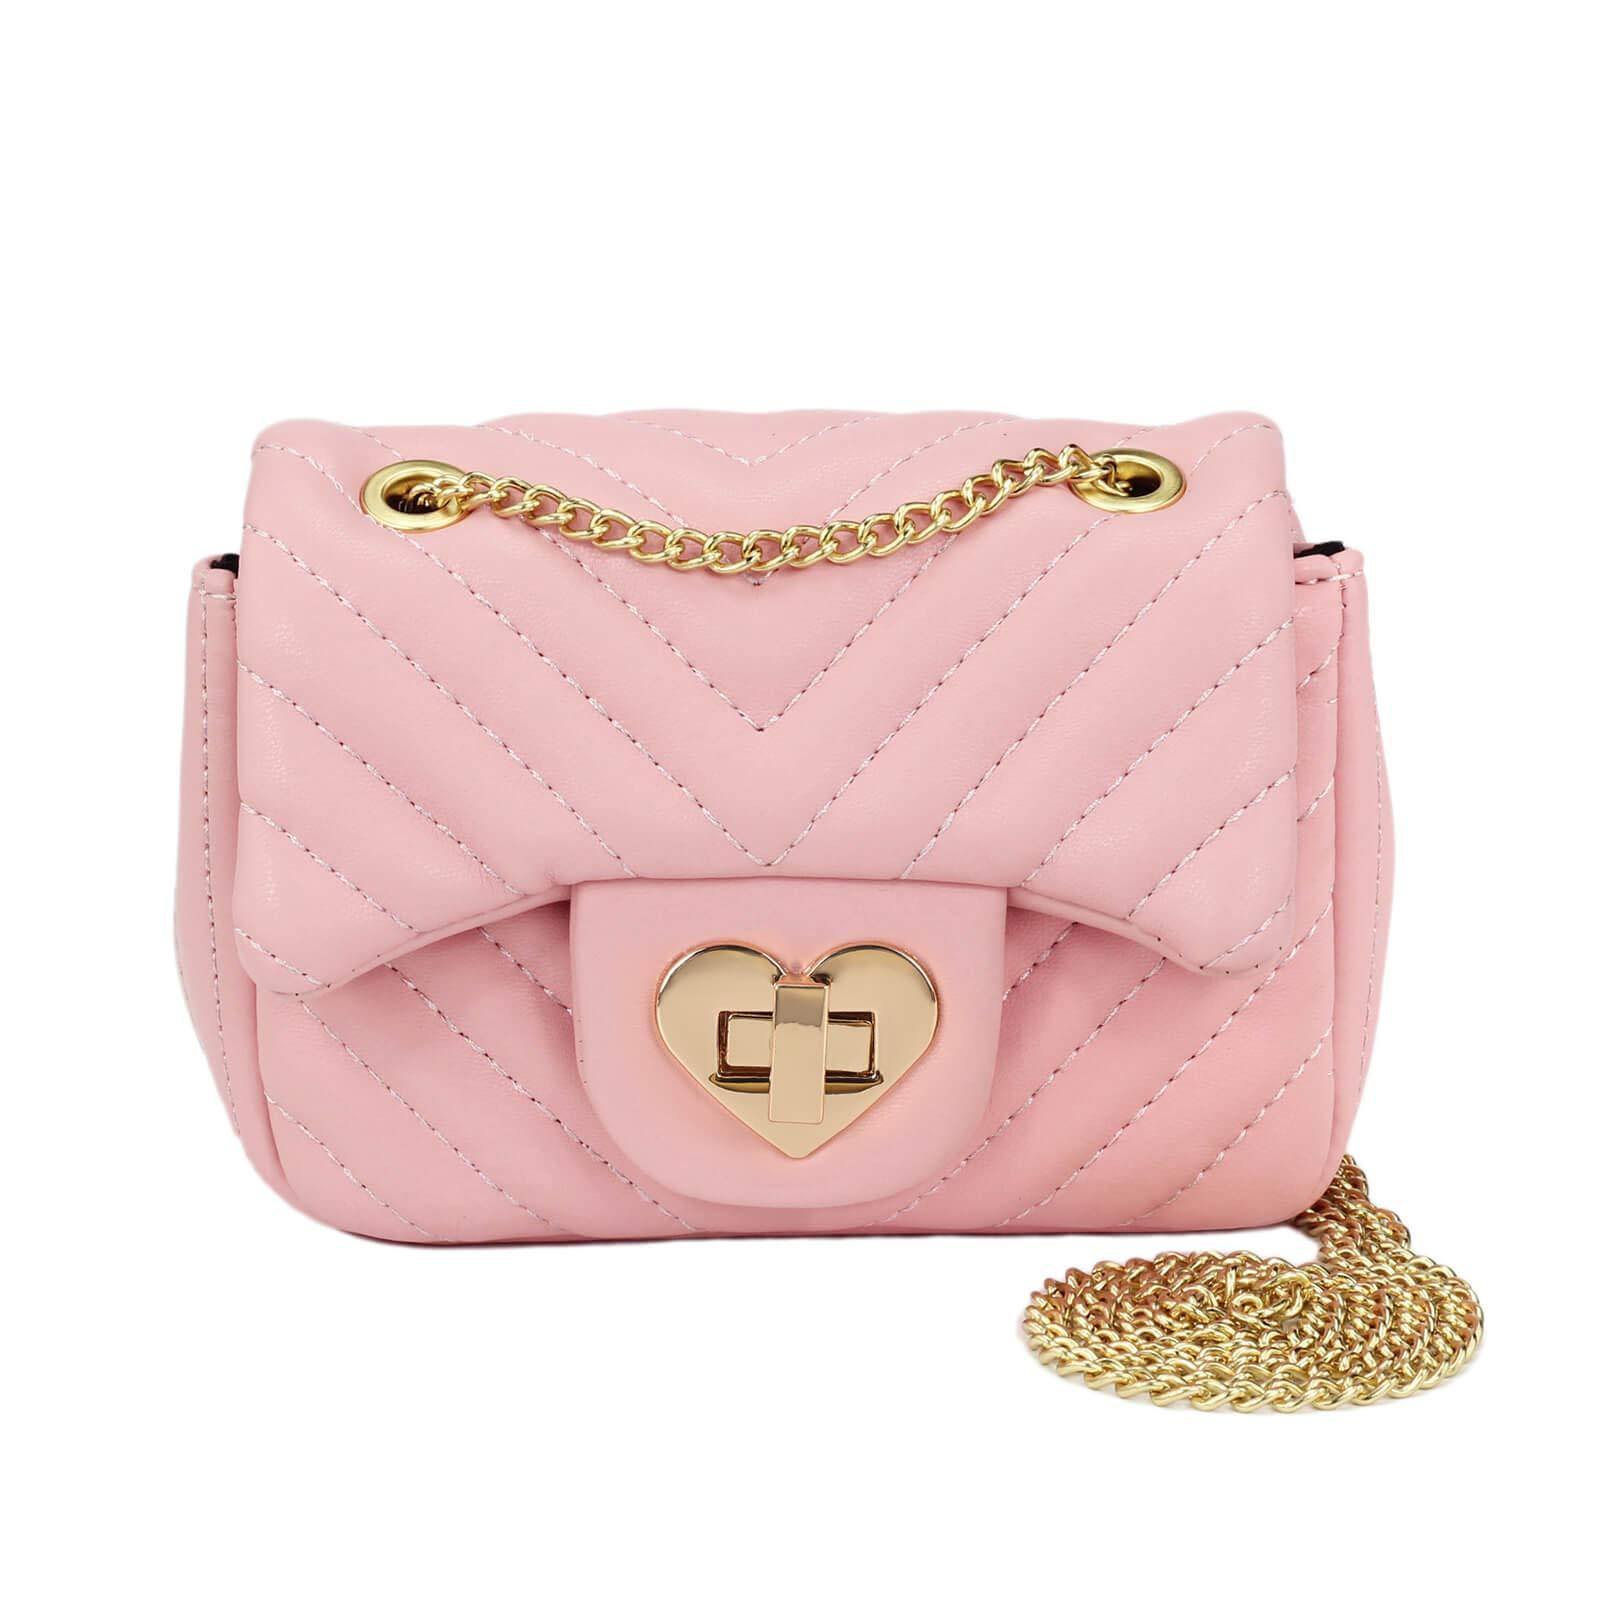 Classic Purse for Girls Crossbody Bag Mibasies Pink 